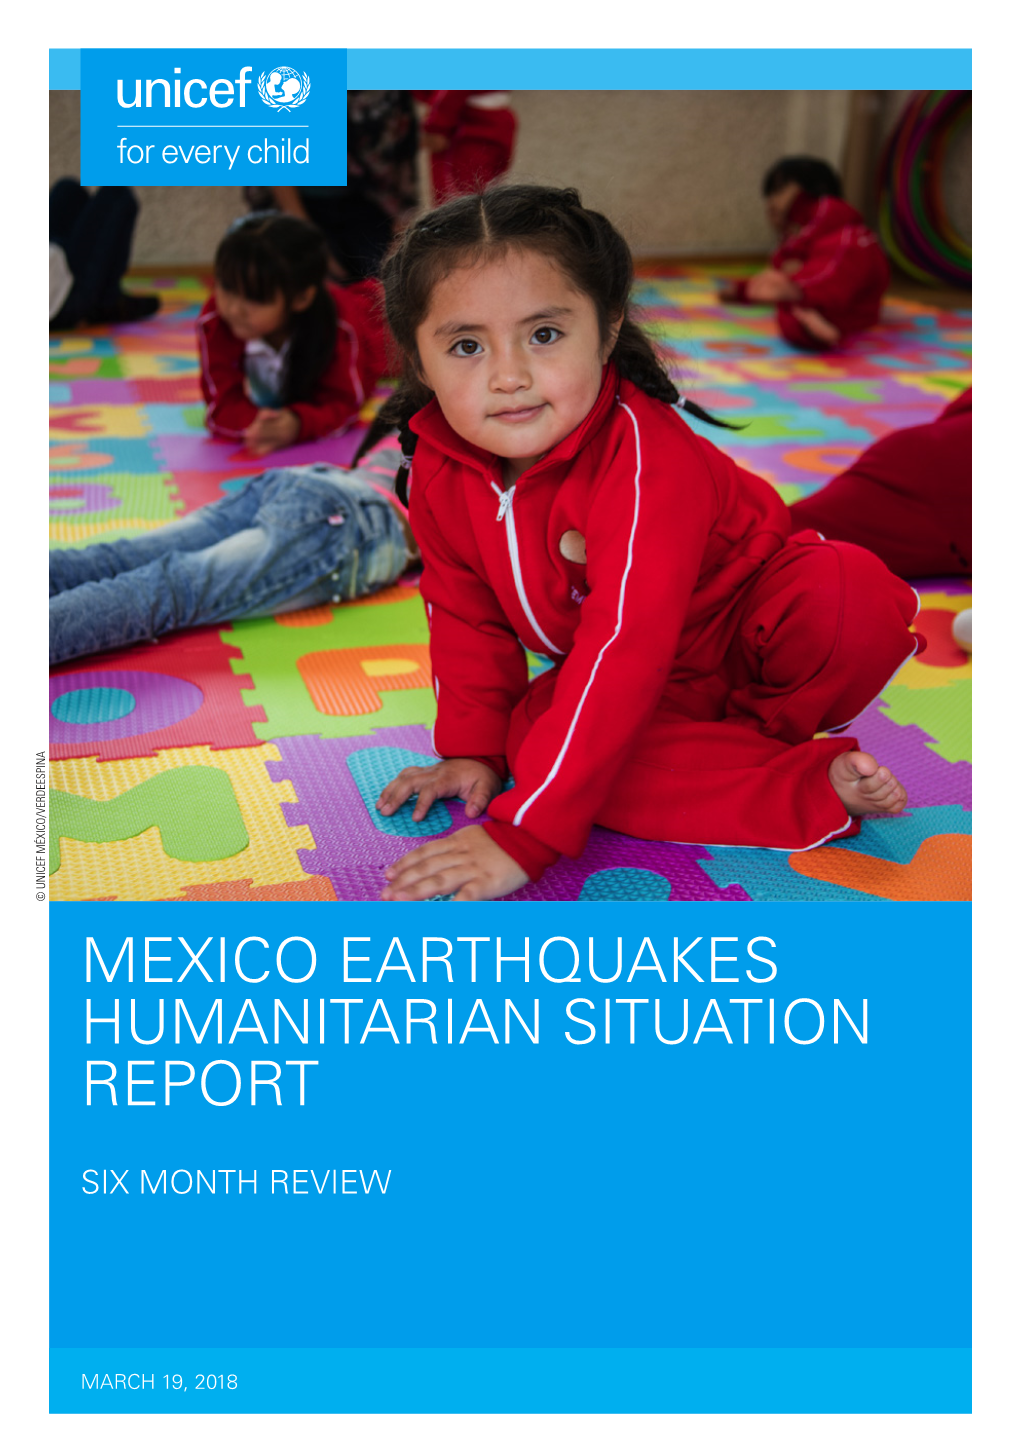 UNICEF Mexico Earthquakes Humanitarian Situation Report Six